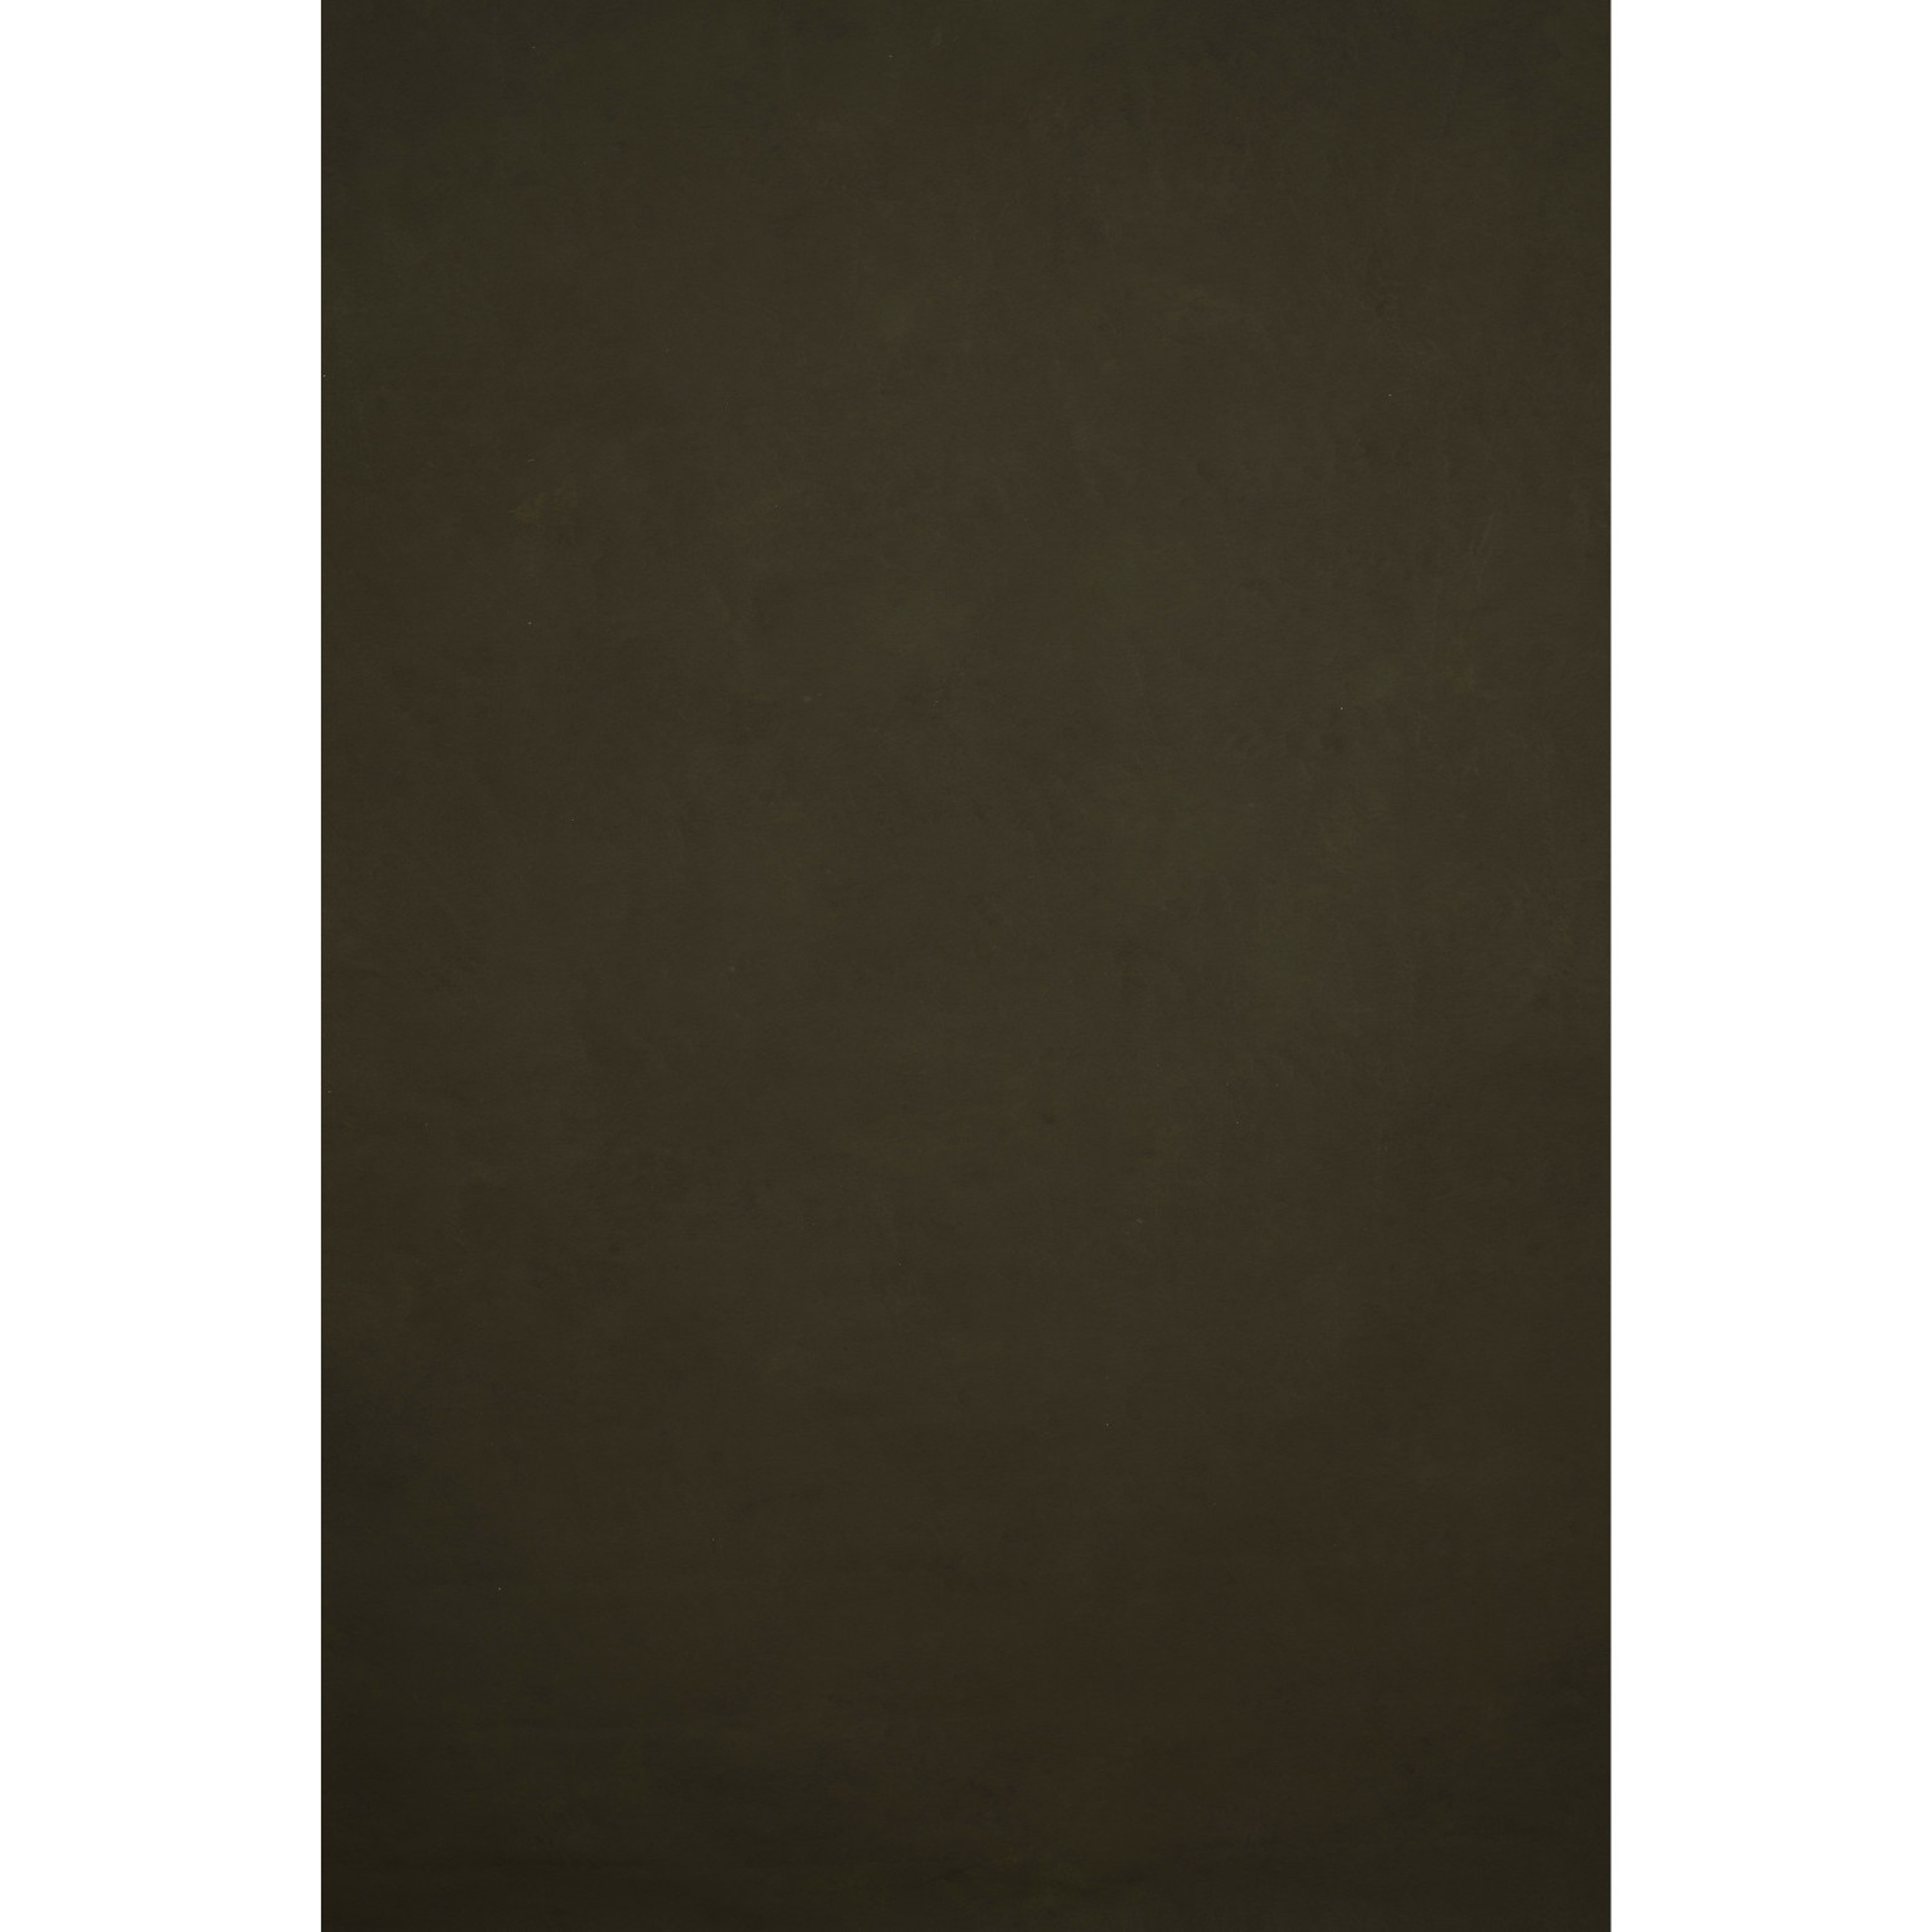 Gravity Backdrops Olive Green Low Texture LG (SN: 11042)